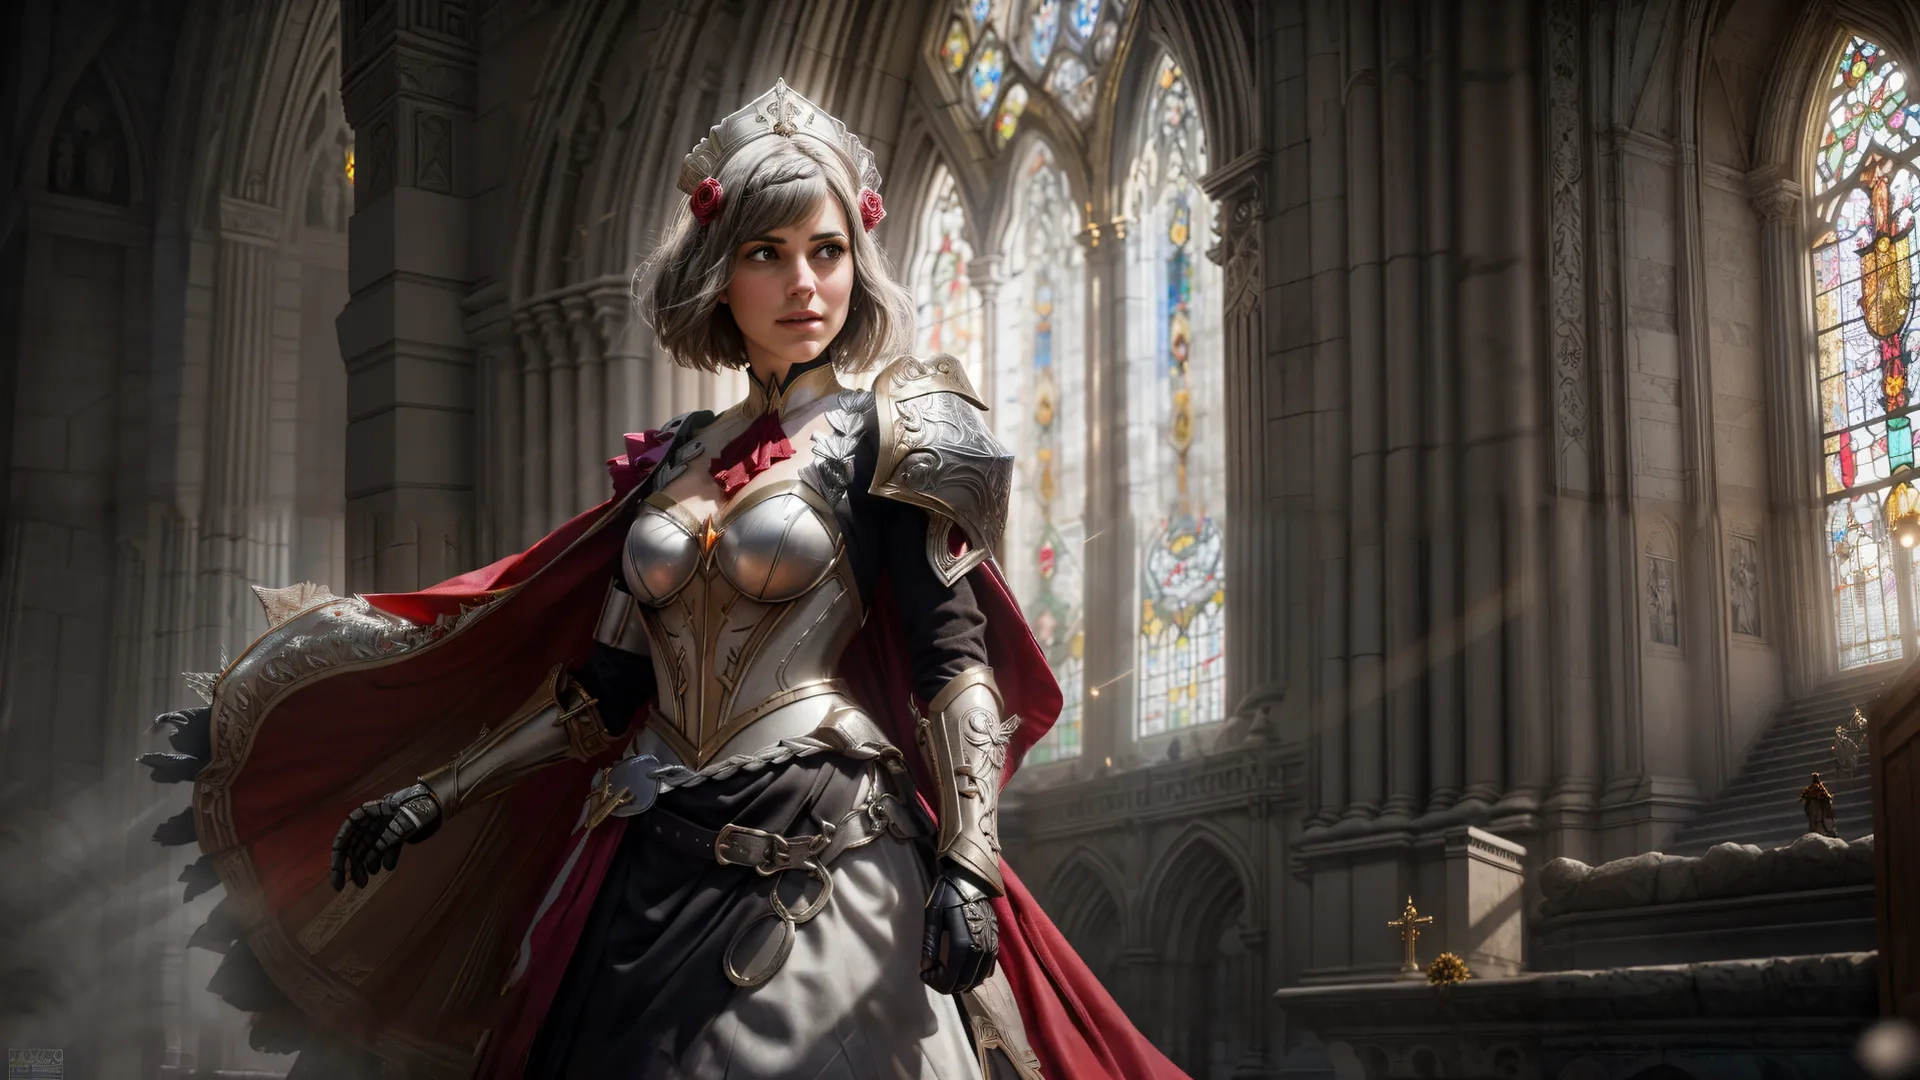 an elegant knight woman standing in a church, next to a staircase and stained glass windows while wearing an elegant red cape and armor suit and full of her
